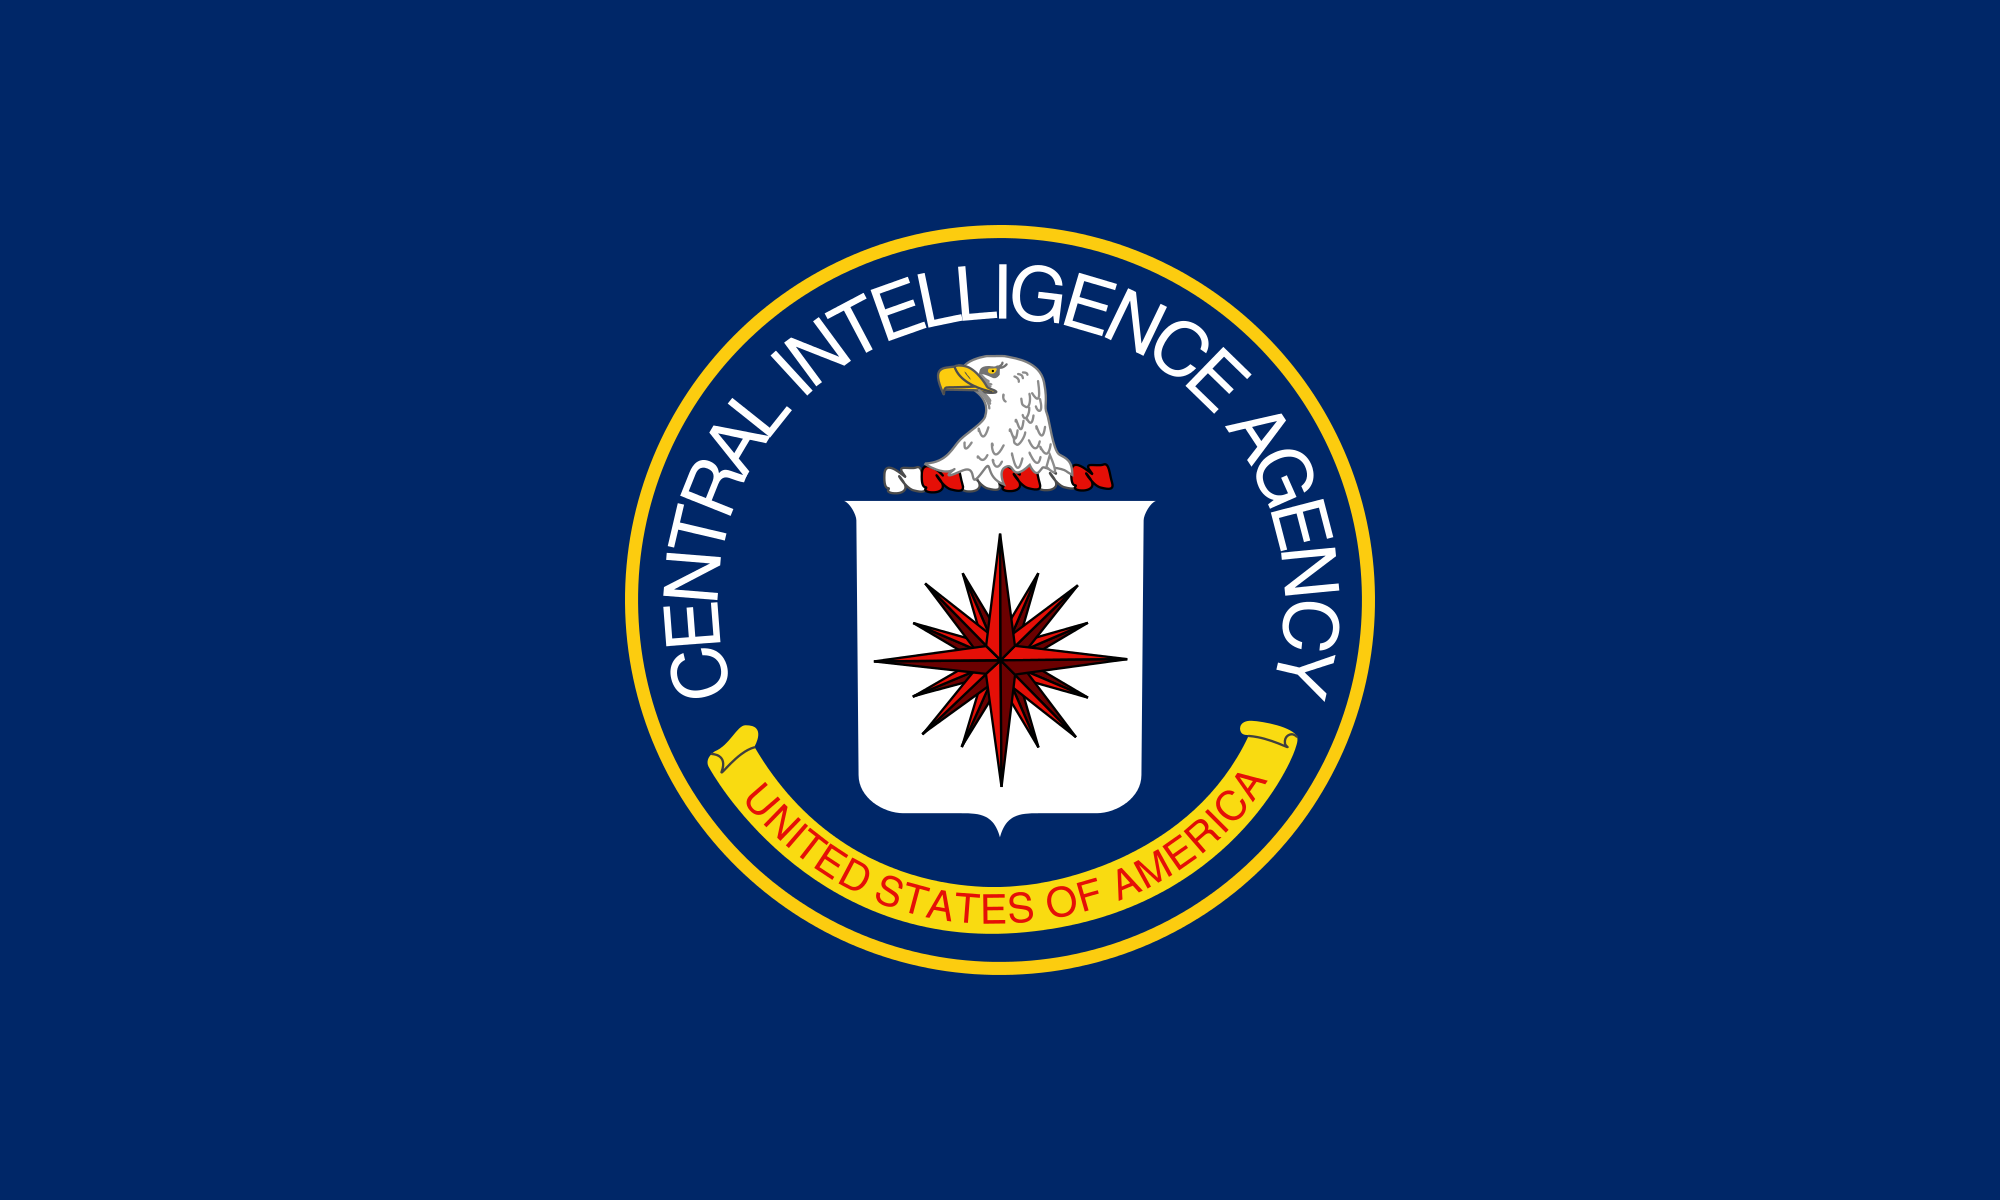 WikiLeaks exposes secret CIA division dedicated to hacking iPhones and other devices - and spreads all its procedures to the world [atualizado]